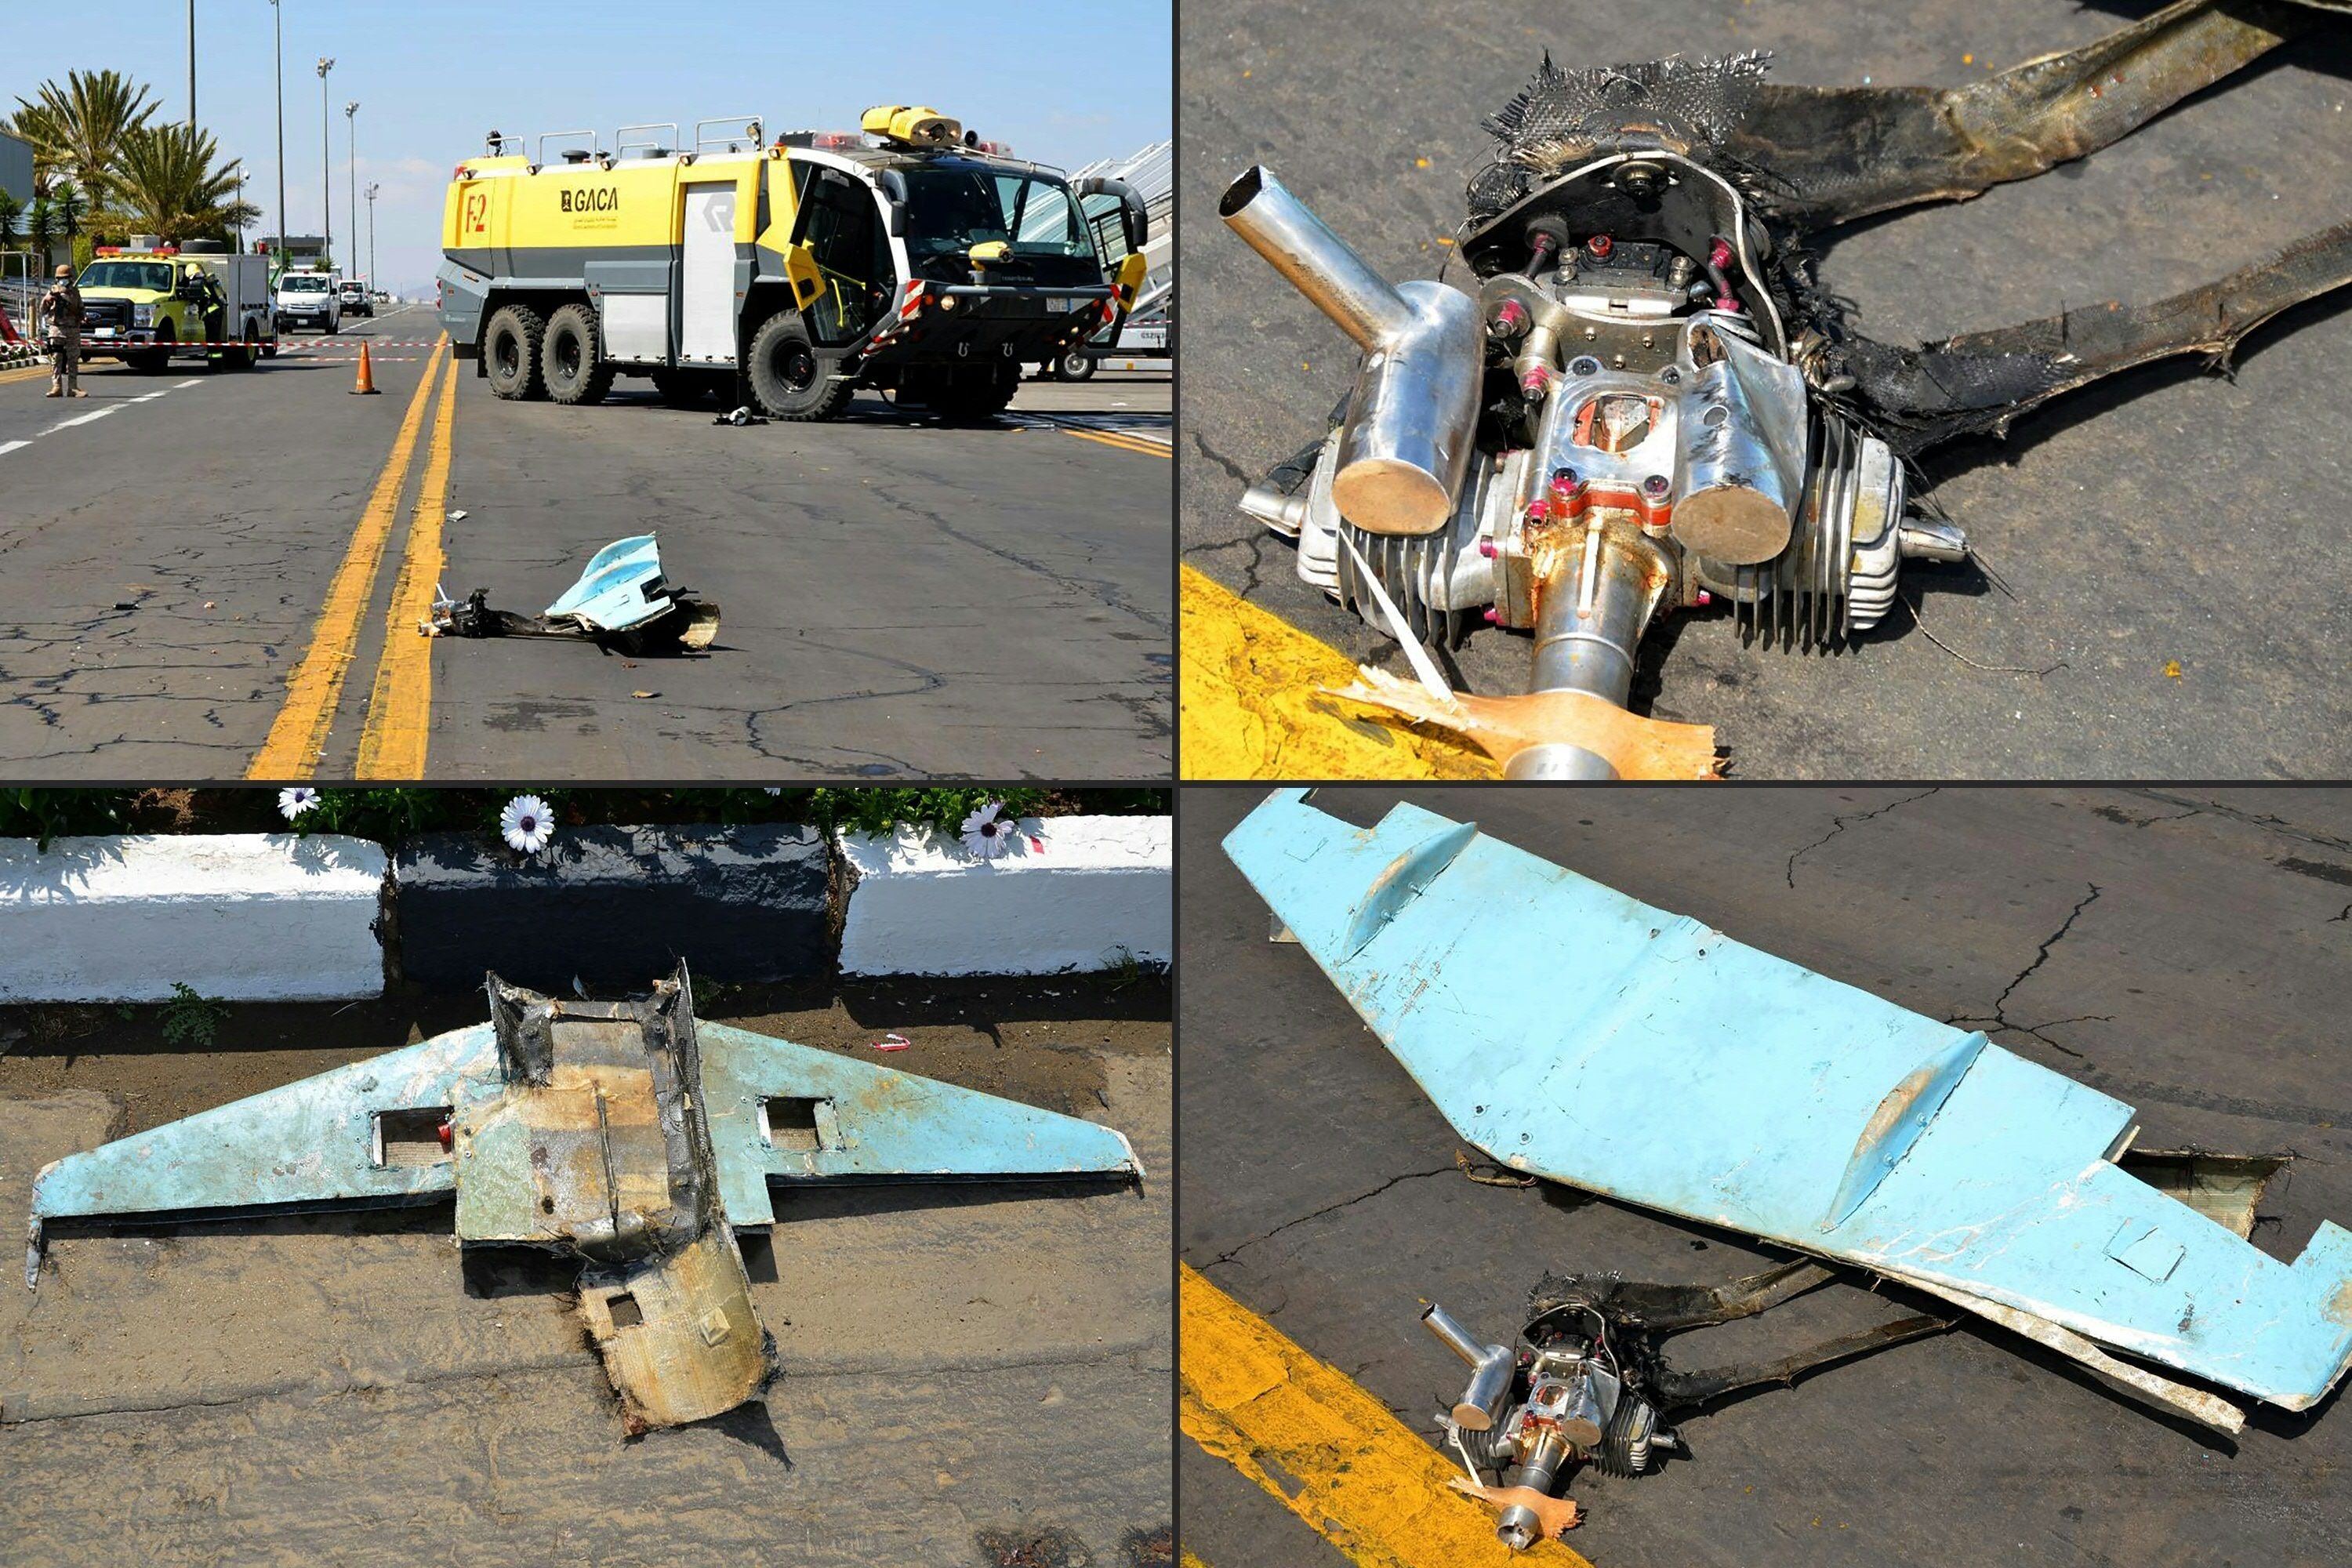 This combination of file pictures provided by Saudi Arabia's Ministry of Media on Feb. 10, 2021 reportedly shows the wreckage of an unmanned aerial vehicle (UAV or drone) that was used in a Houthi rebels attack on Abha International Airport in Saudi Arabia's southern Asir province last year. (Saudi Ministry of Media / AFP Photo)